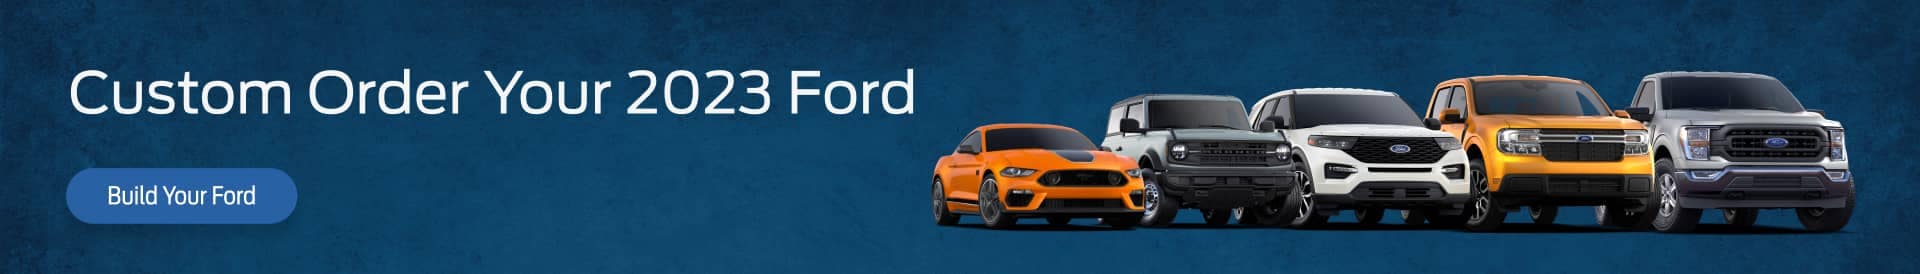 Customer Order your 2023 Ford banner